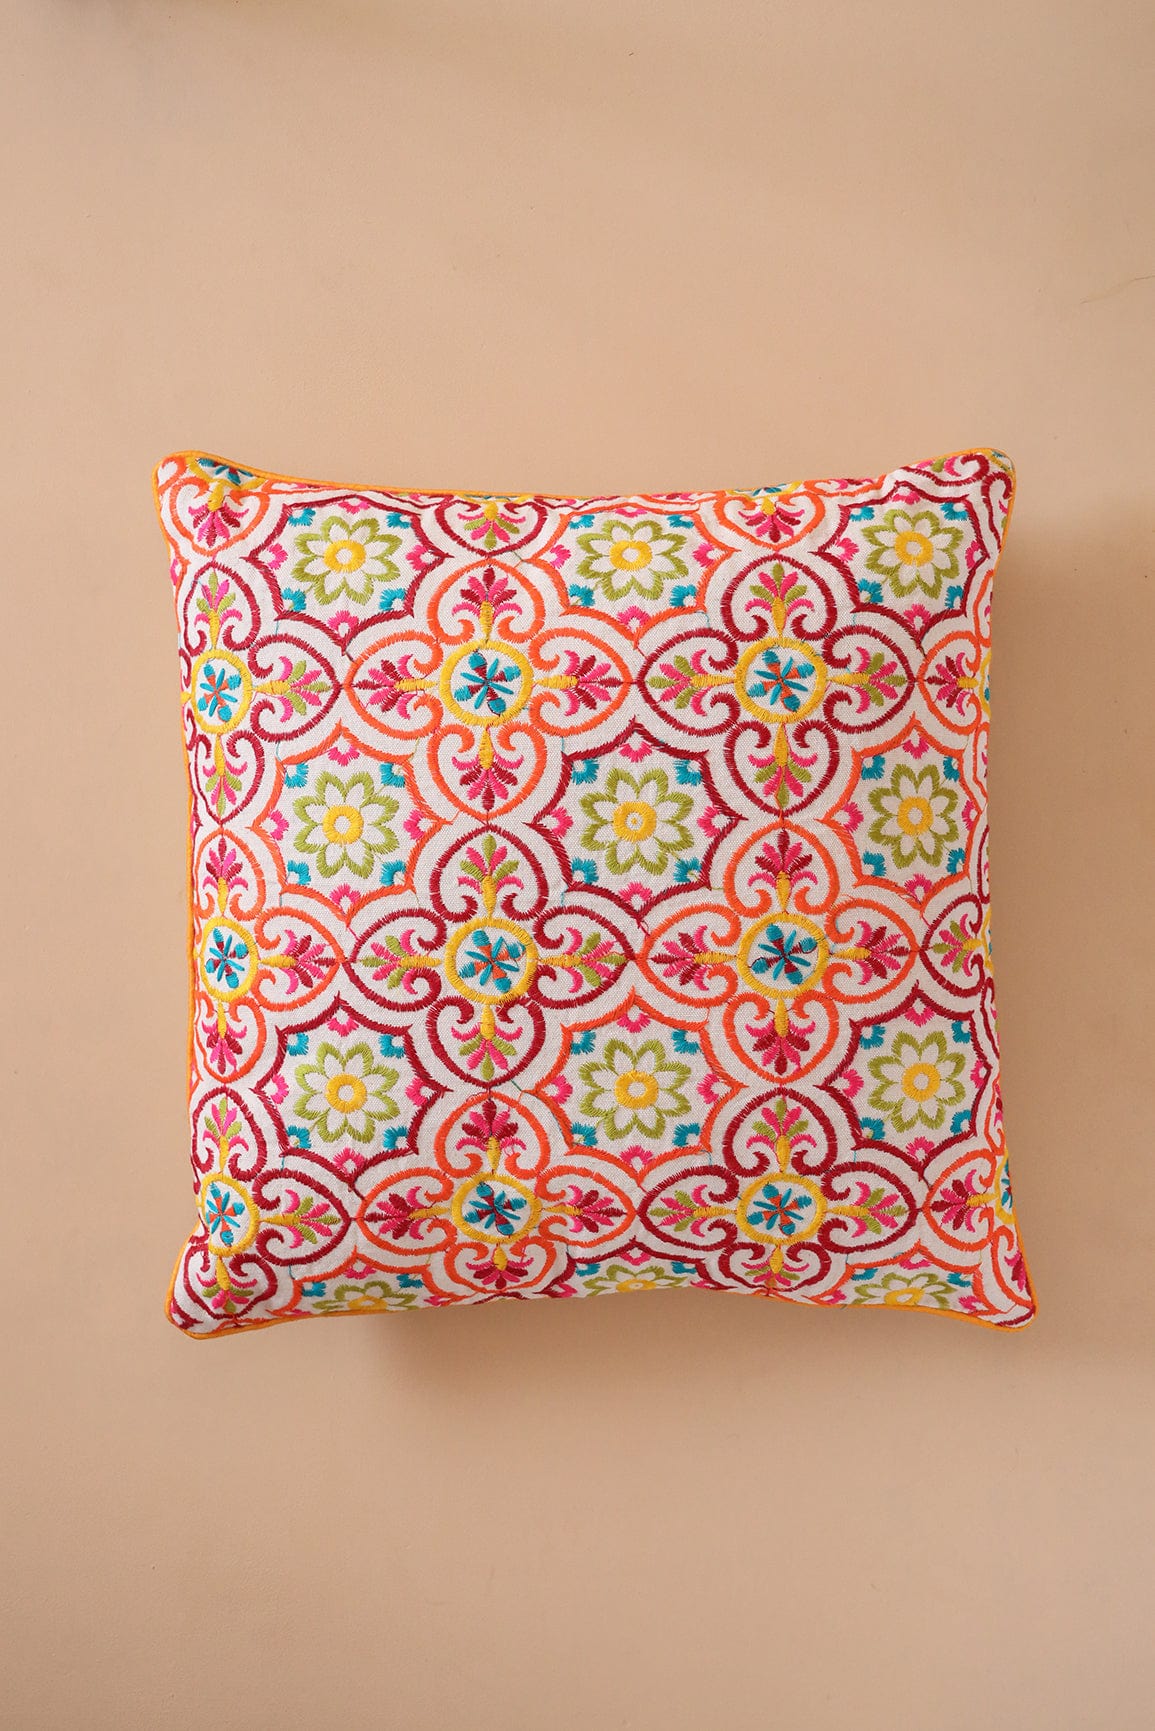 doeraa Multi Coloured Embroidery on off white cotton Cushion Cover (16*16 inches)